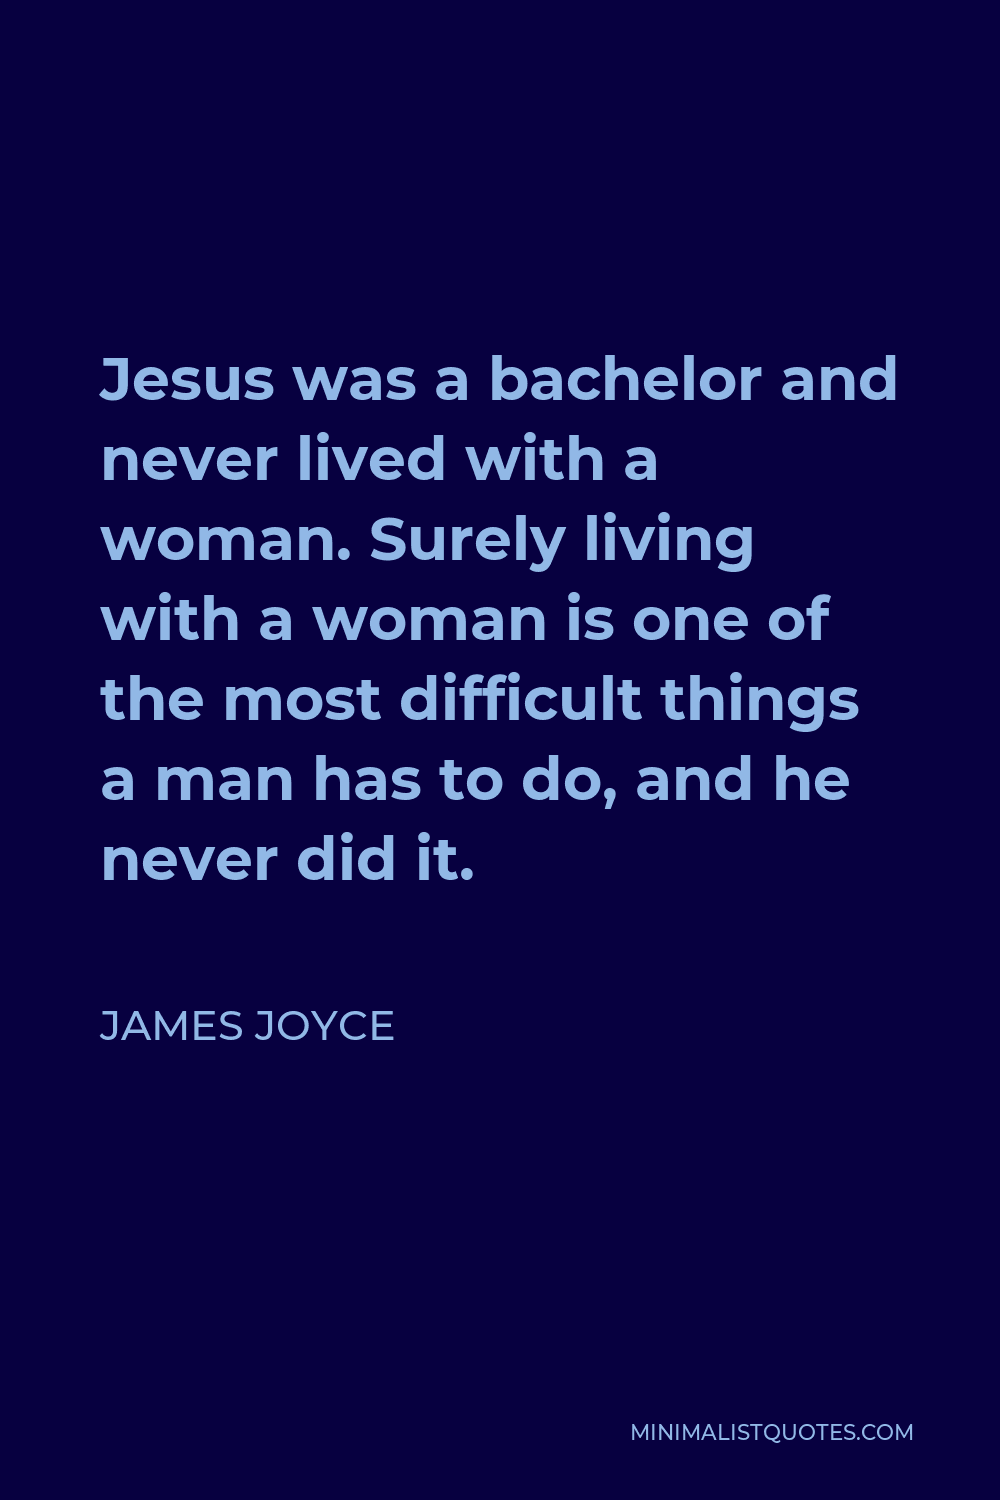 James Joyce Quote - Jesus was a bachelor and never lived with a woman. Surely living with a woman is one of the most difficult things a man has to do, and he never did it.